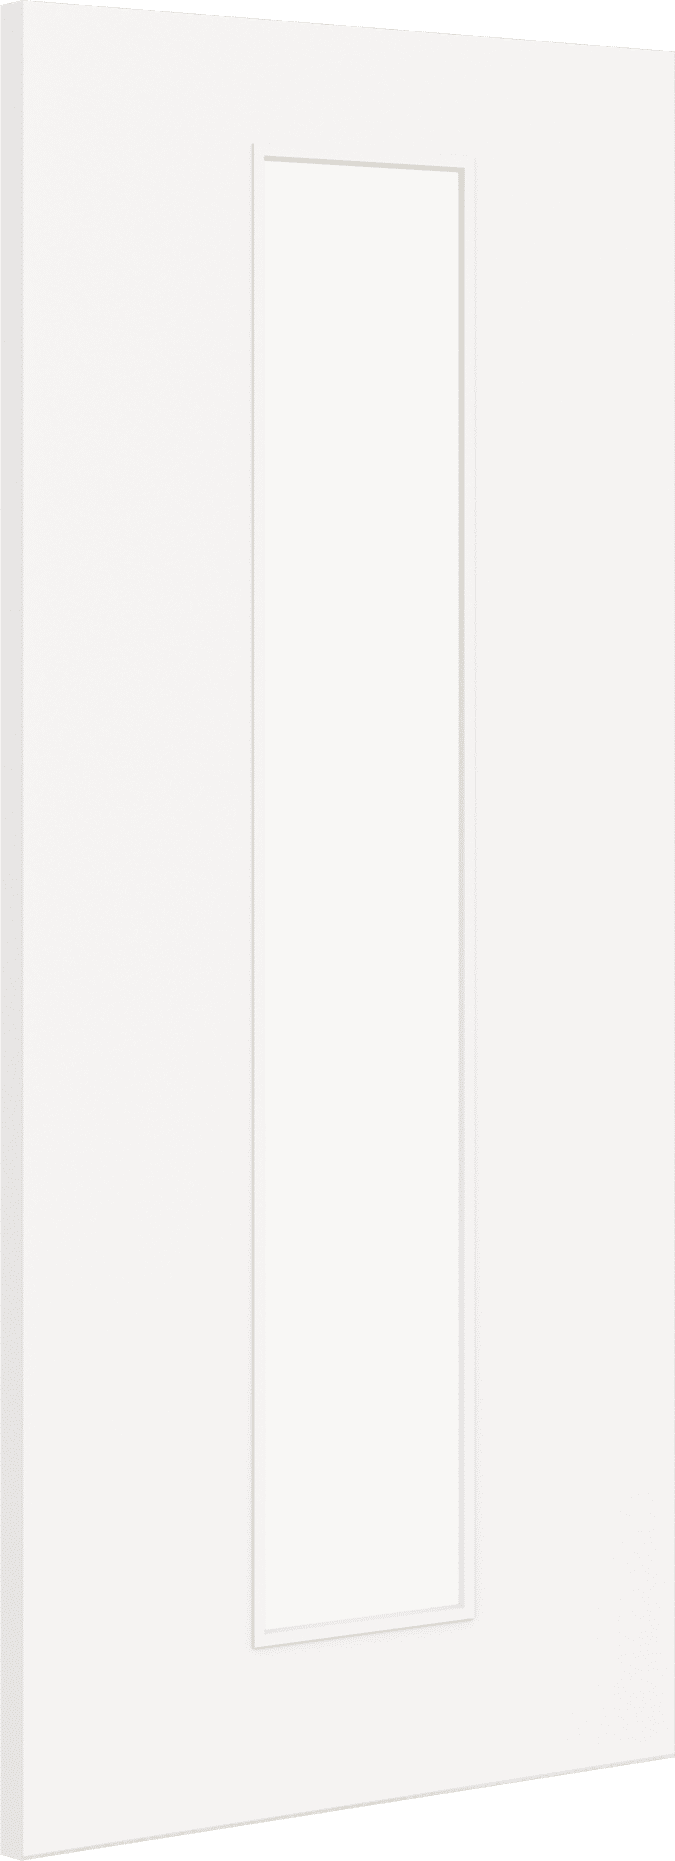 1981mm x 762mm x 44mm (30") Architectural Paint Grade White 10 Frosted Glazed Fire Door Blank